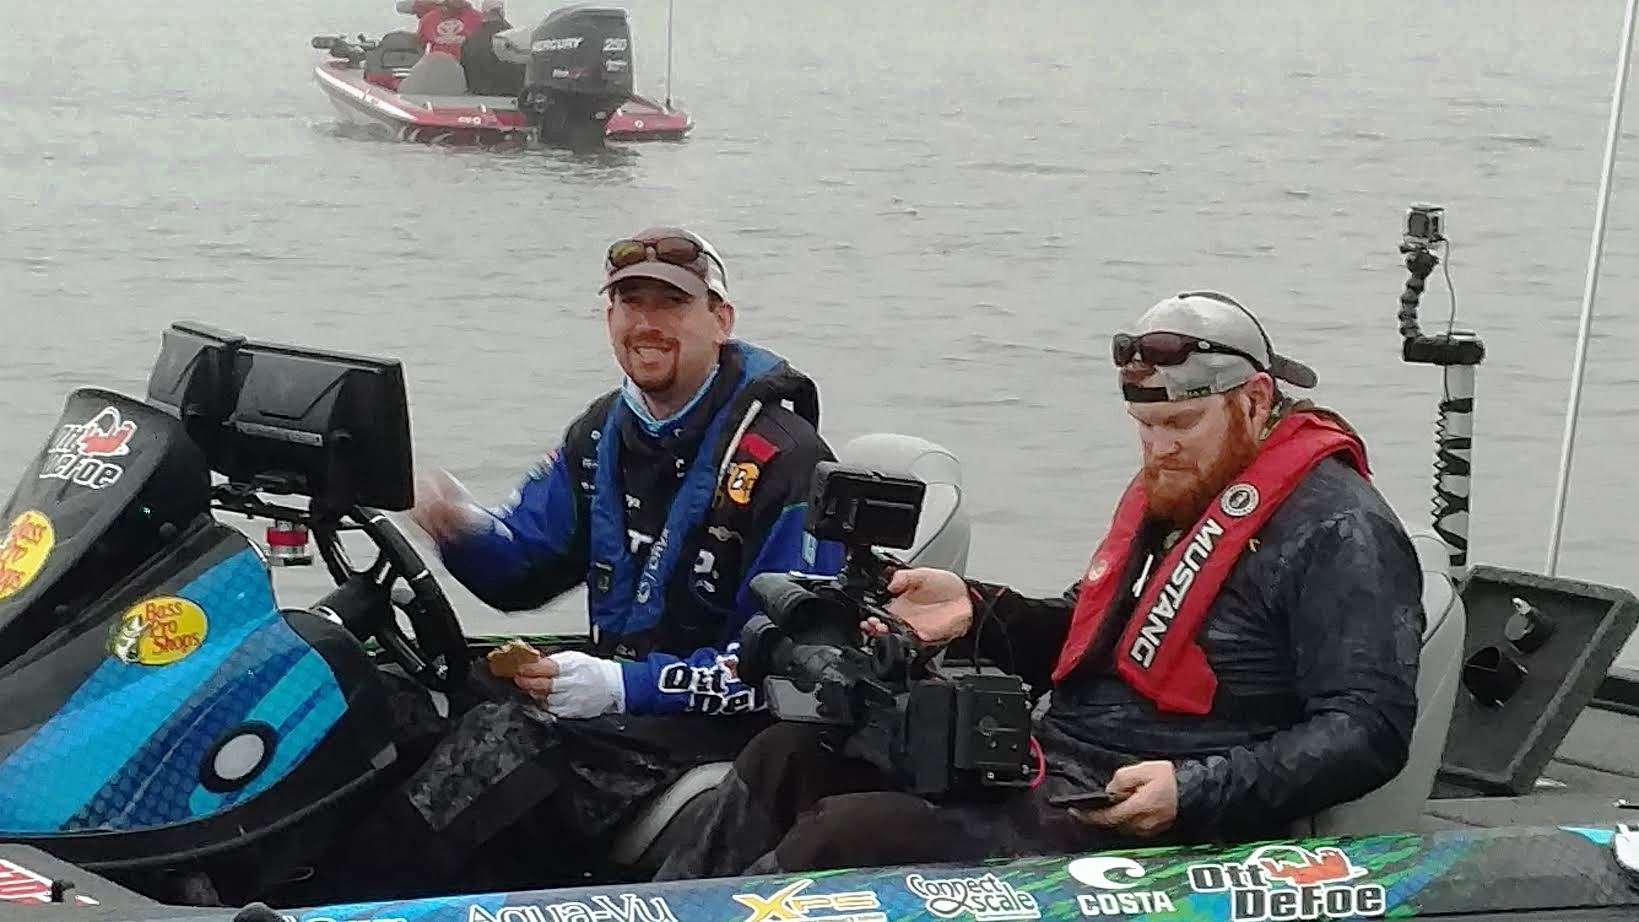 As the second day on Lake Okeechobee begins, Day 1 Leader, Ott DeFoe, gives a nice smile as he eases out to the lake for another day of action.